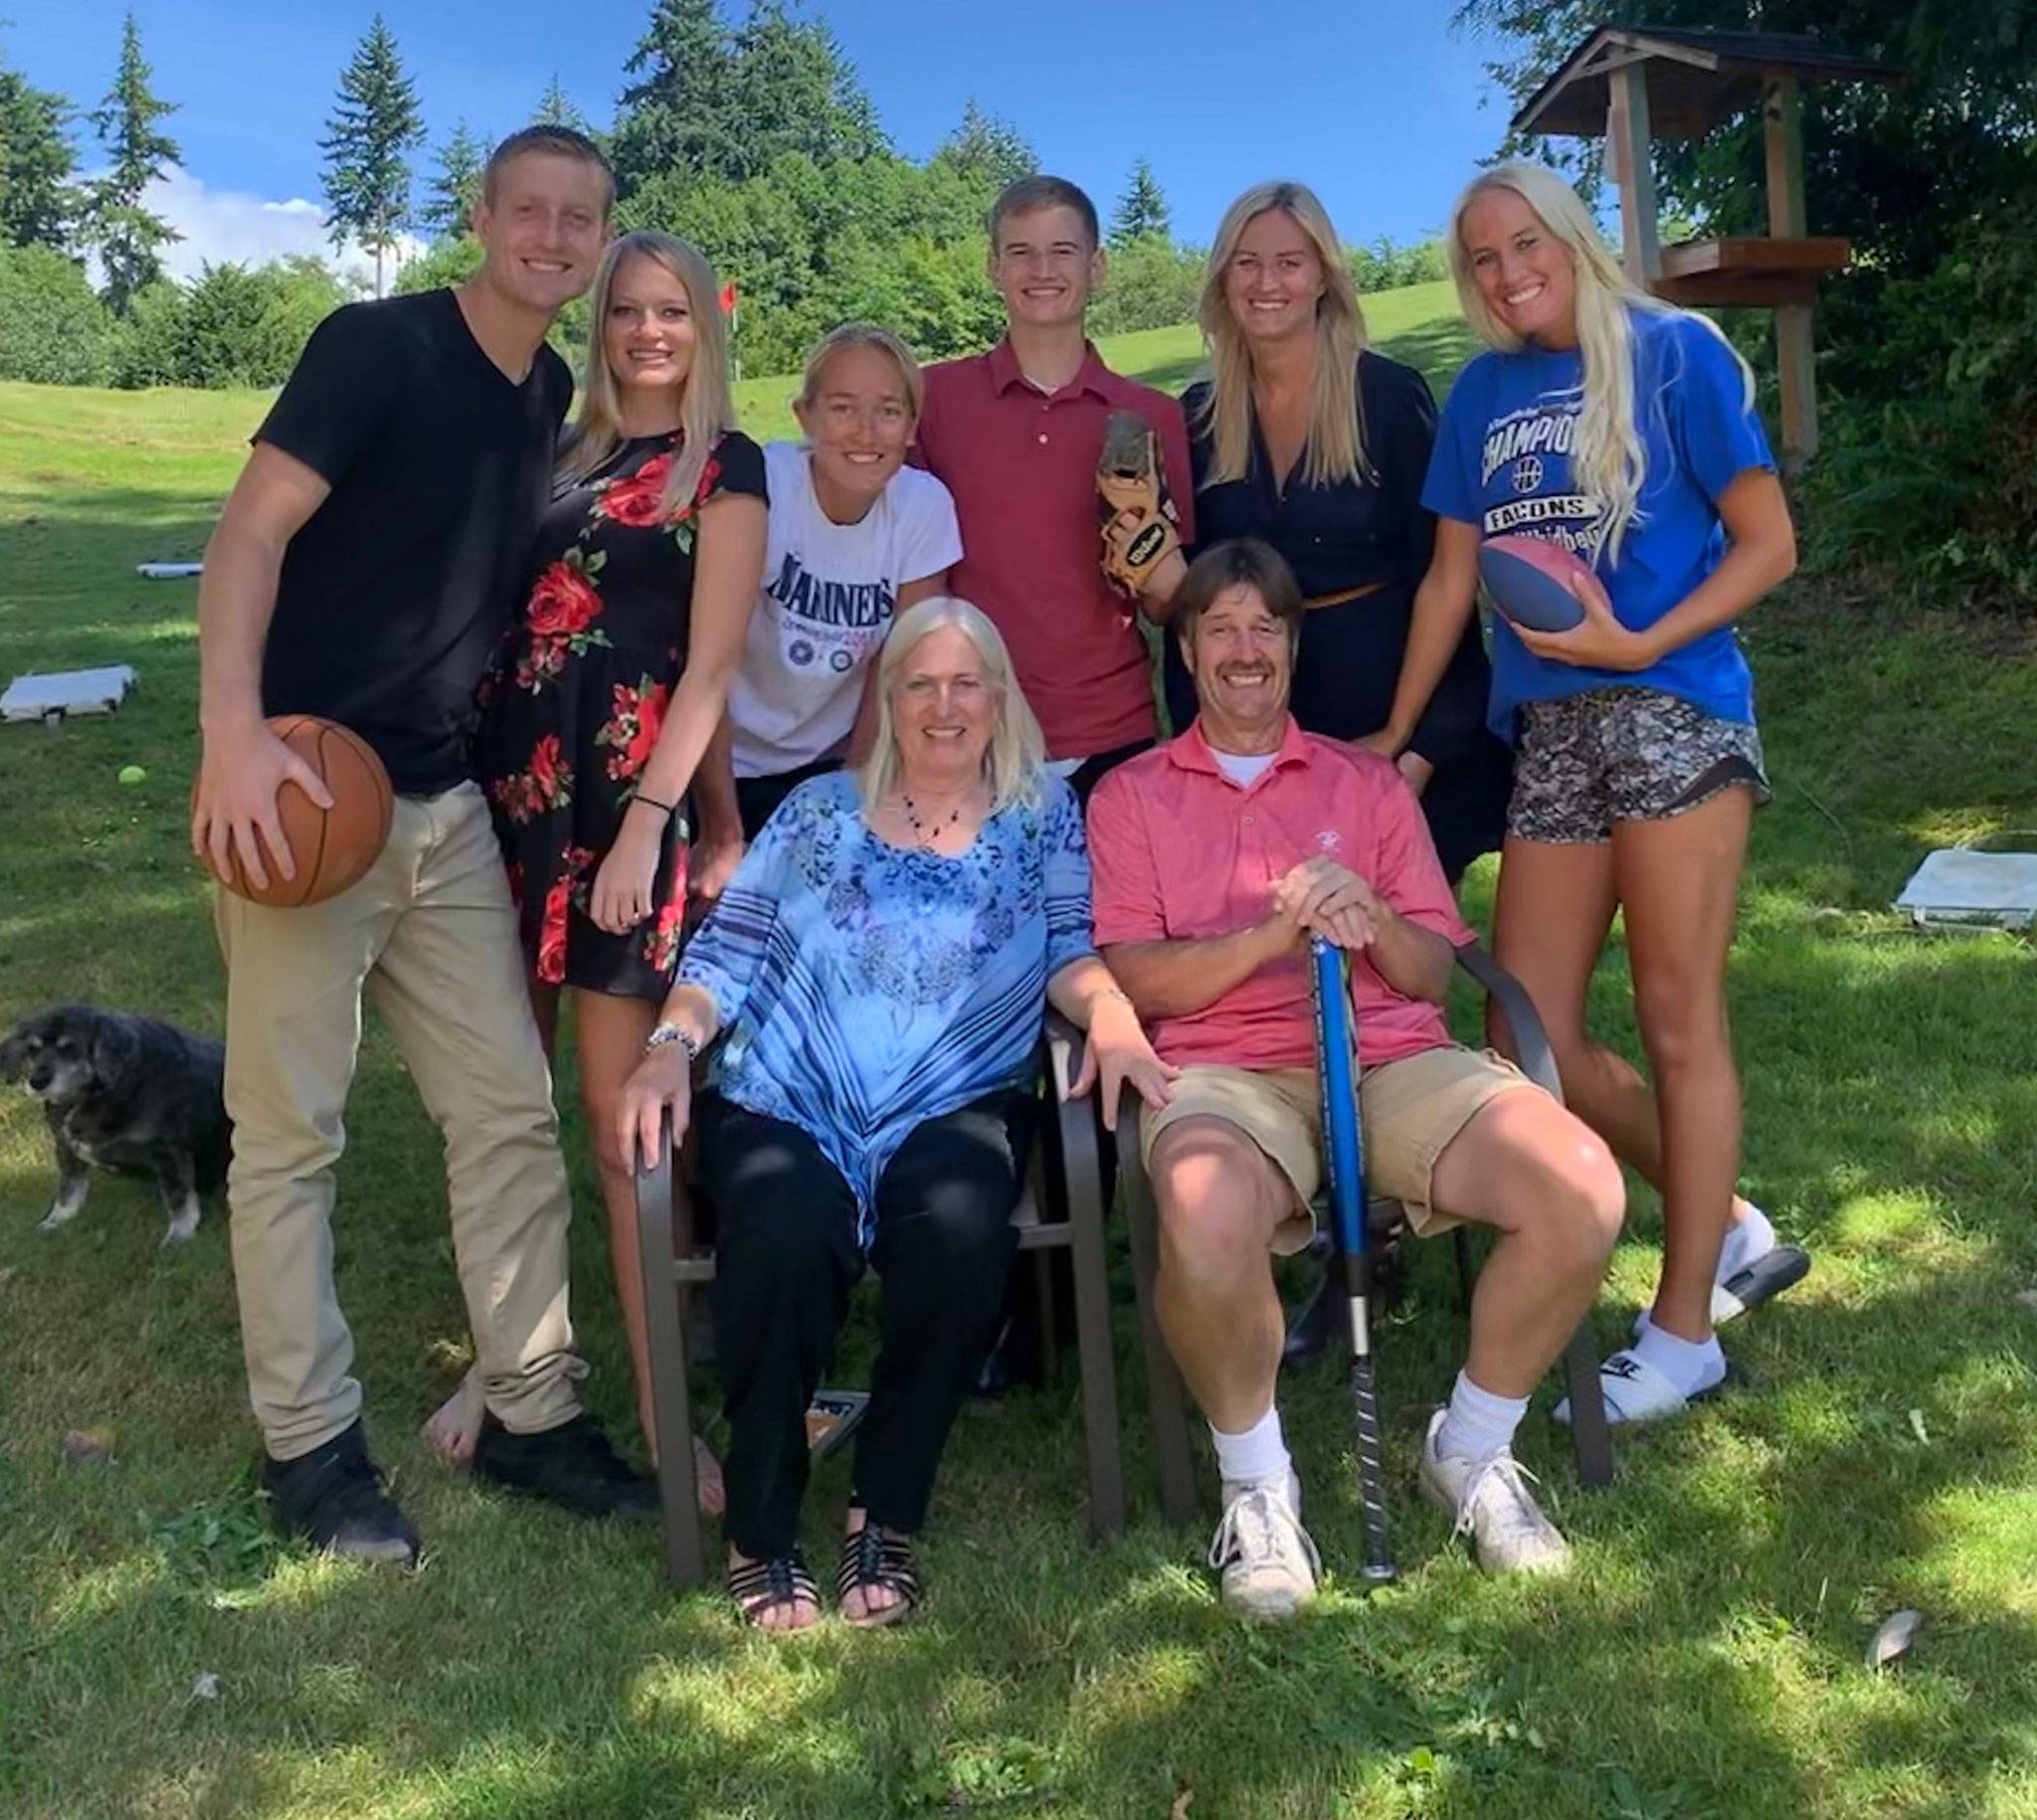 Provided photo                                The Newman family, with sports gear in hand, gather at Kody’s graduation party June 8. Riley (left), Carlie, Lindsey, Kody, Caite and Haley huddle around parents Pam and Mike. Jenny lives in Texas and could not attend.